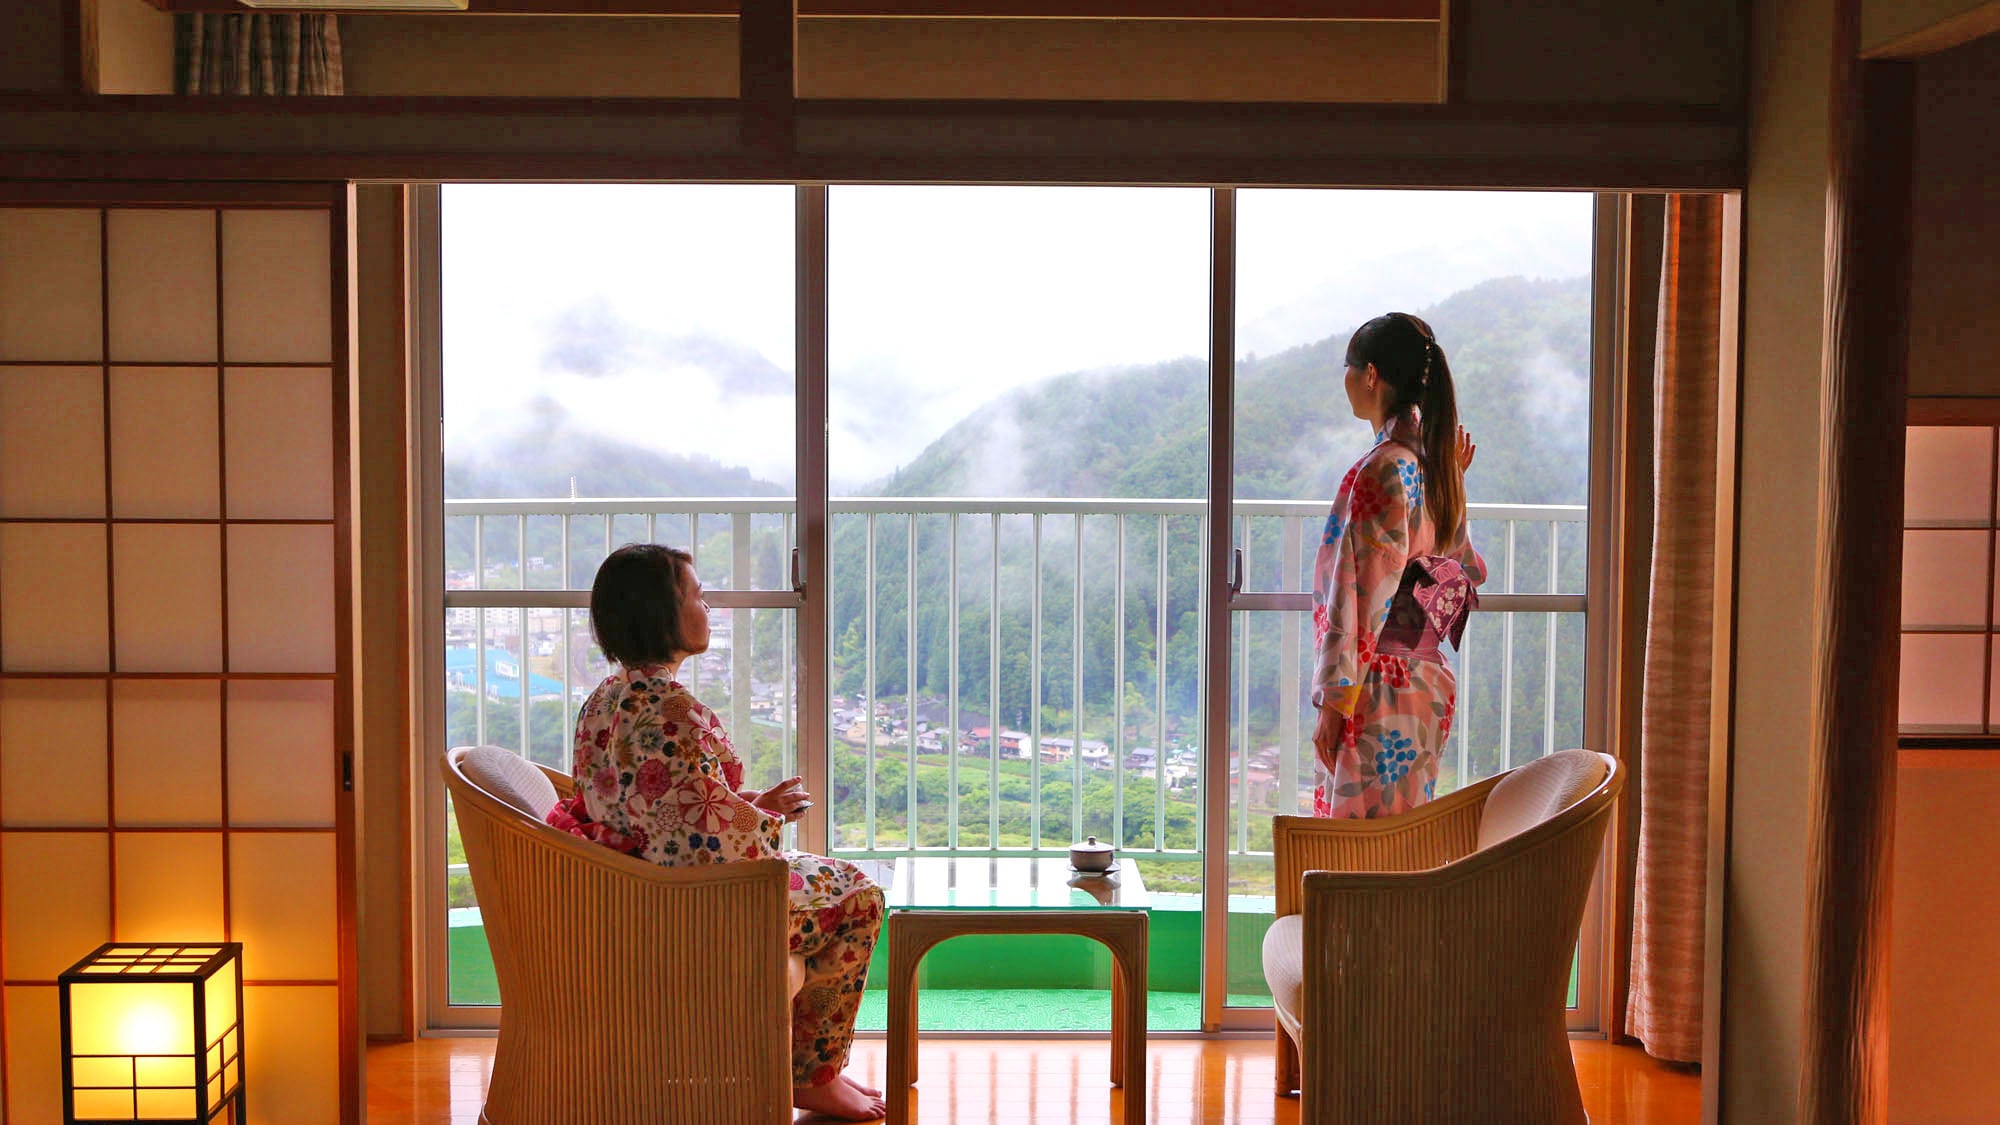 You will be healed by the view of the mountains from your room